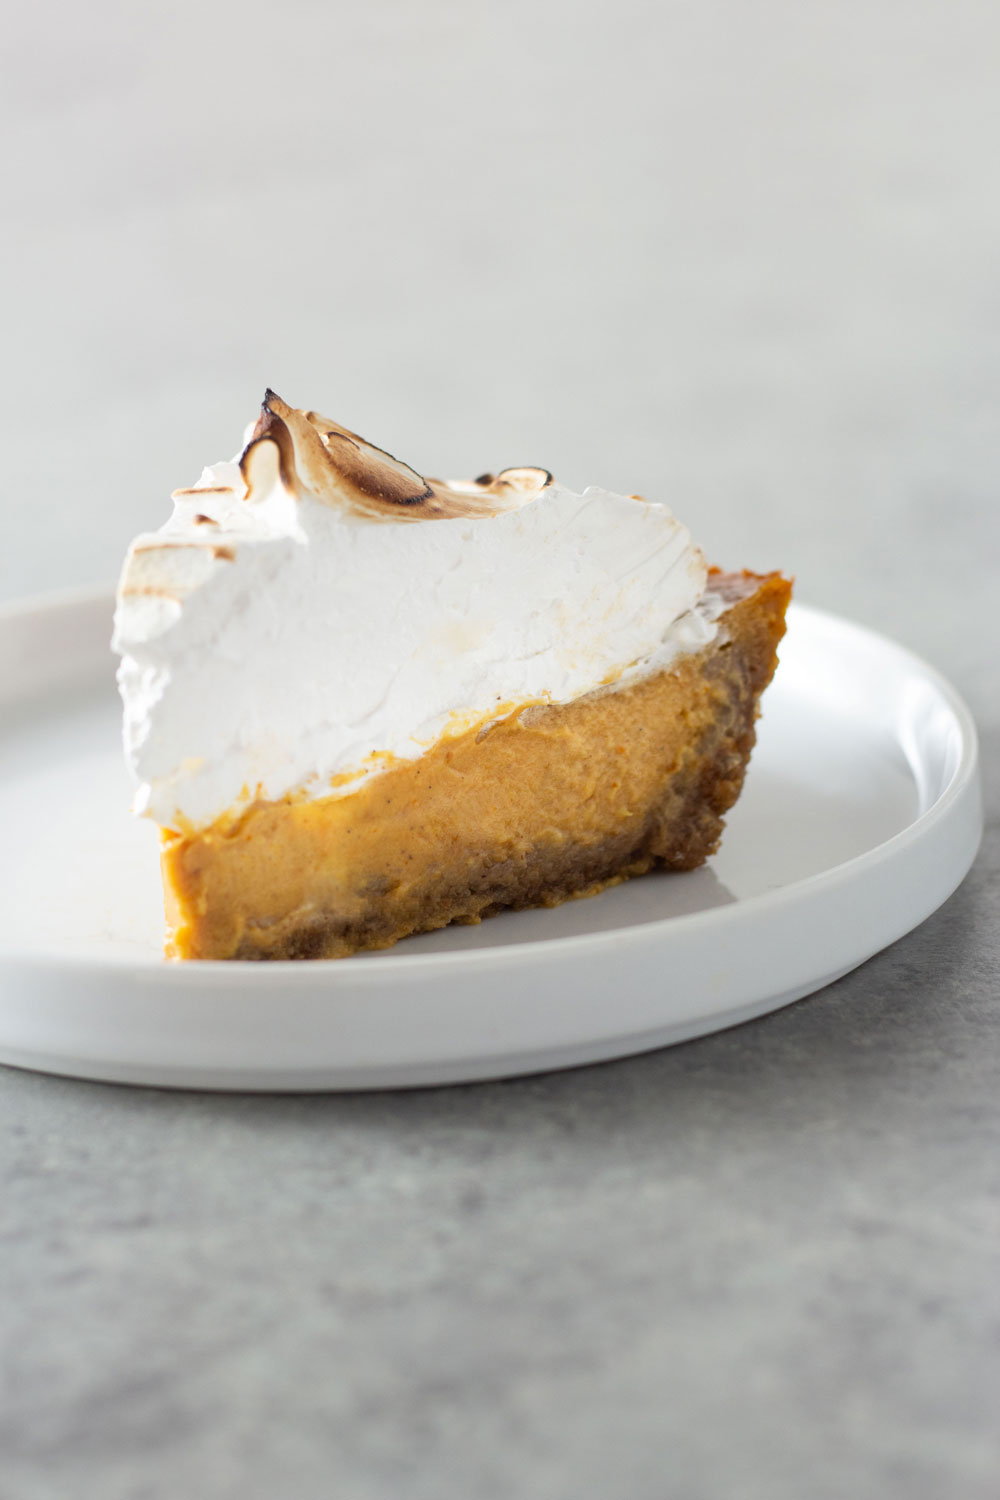 Straight on view of a slice pumpkin meringue pie on a grey, textured surface.